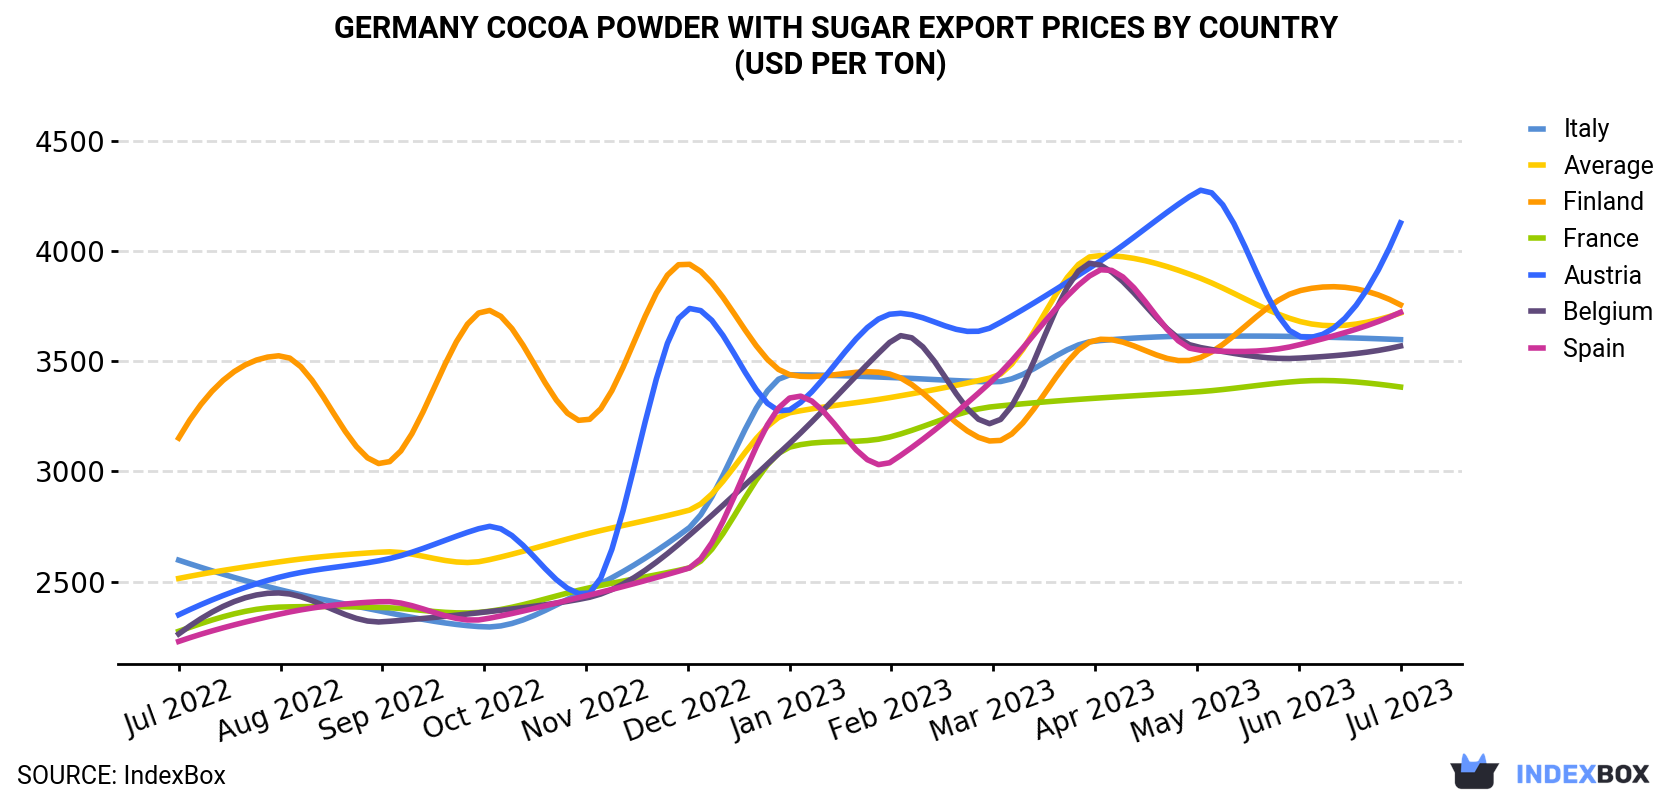 Germany Cocoa Powder With Sugar Export Prices By Country (USD Per Ton)